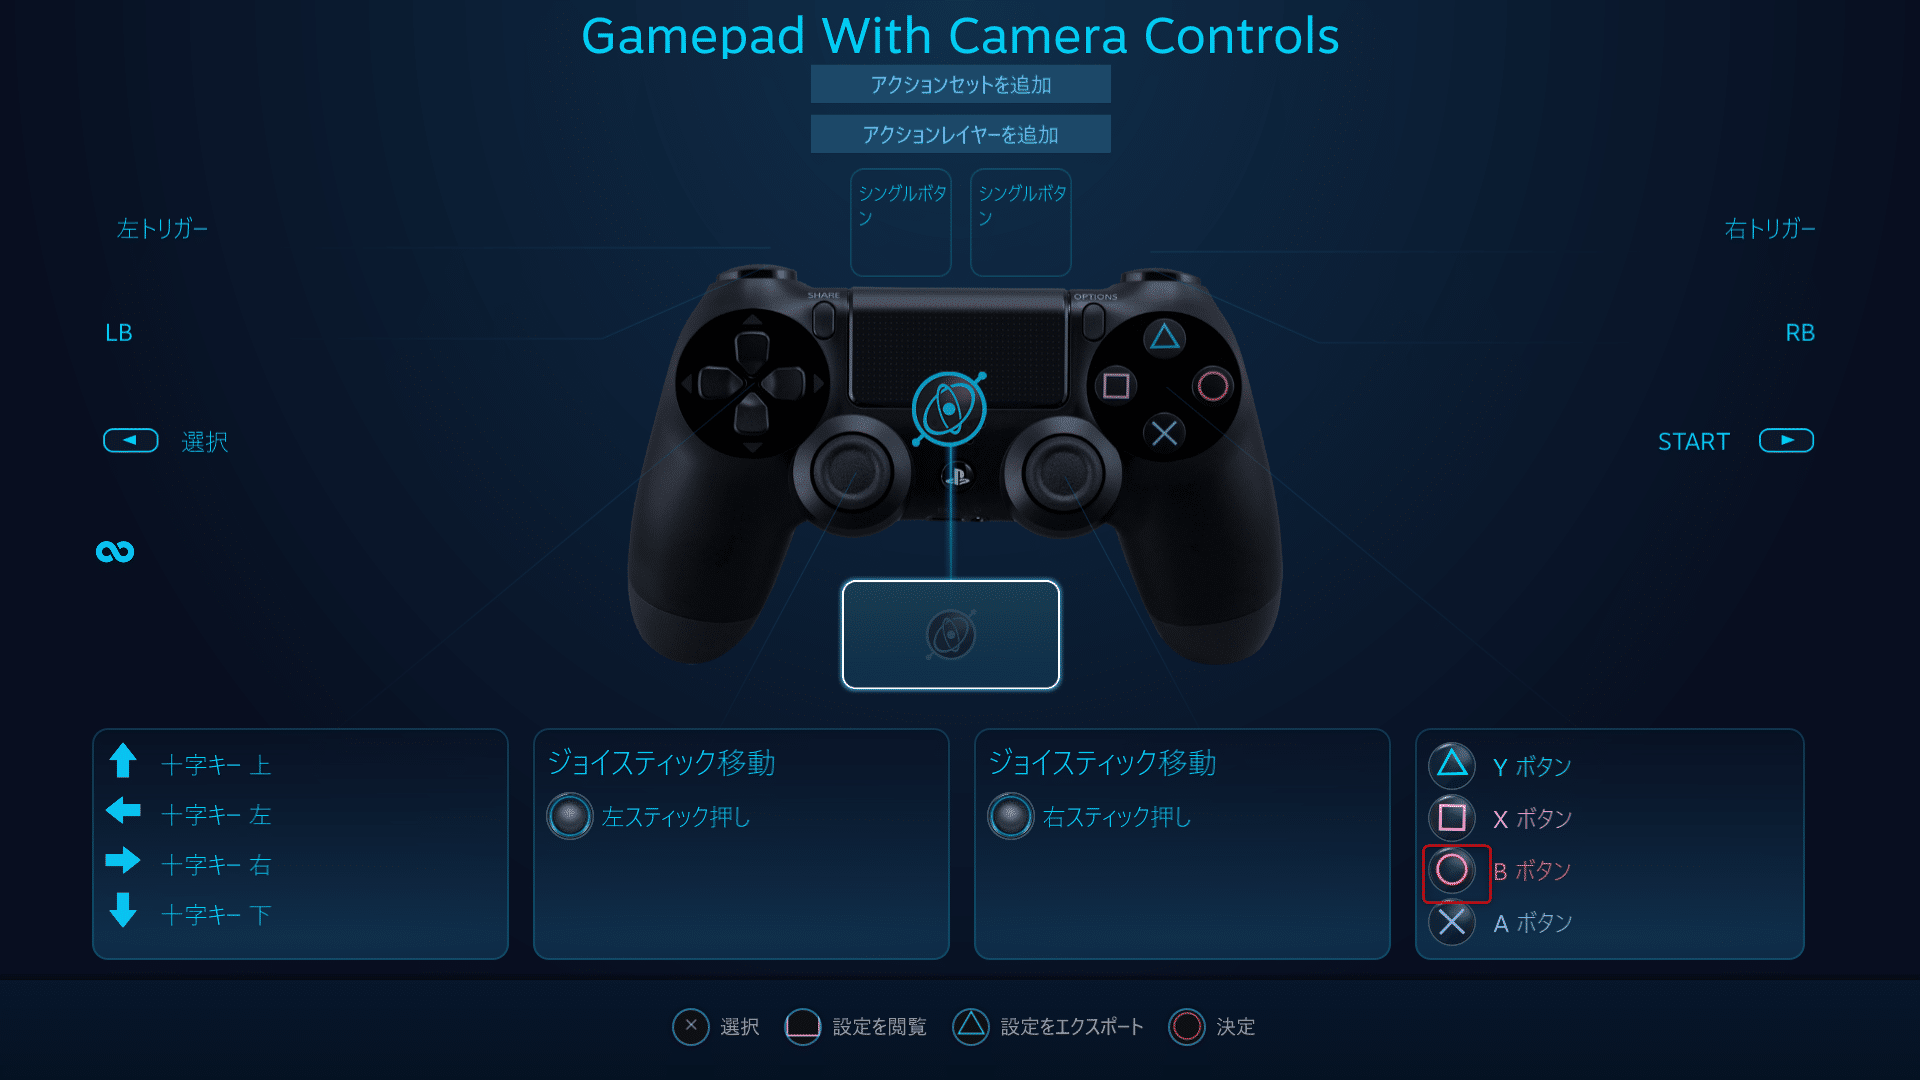 Steam Ps4コントローラーのボタン設定まとめ使用方法から変更まで はりぼう記